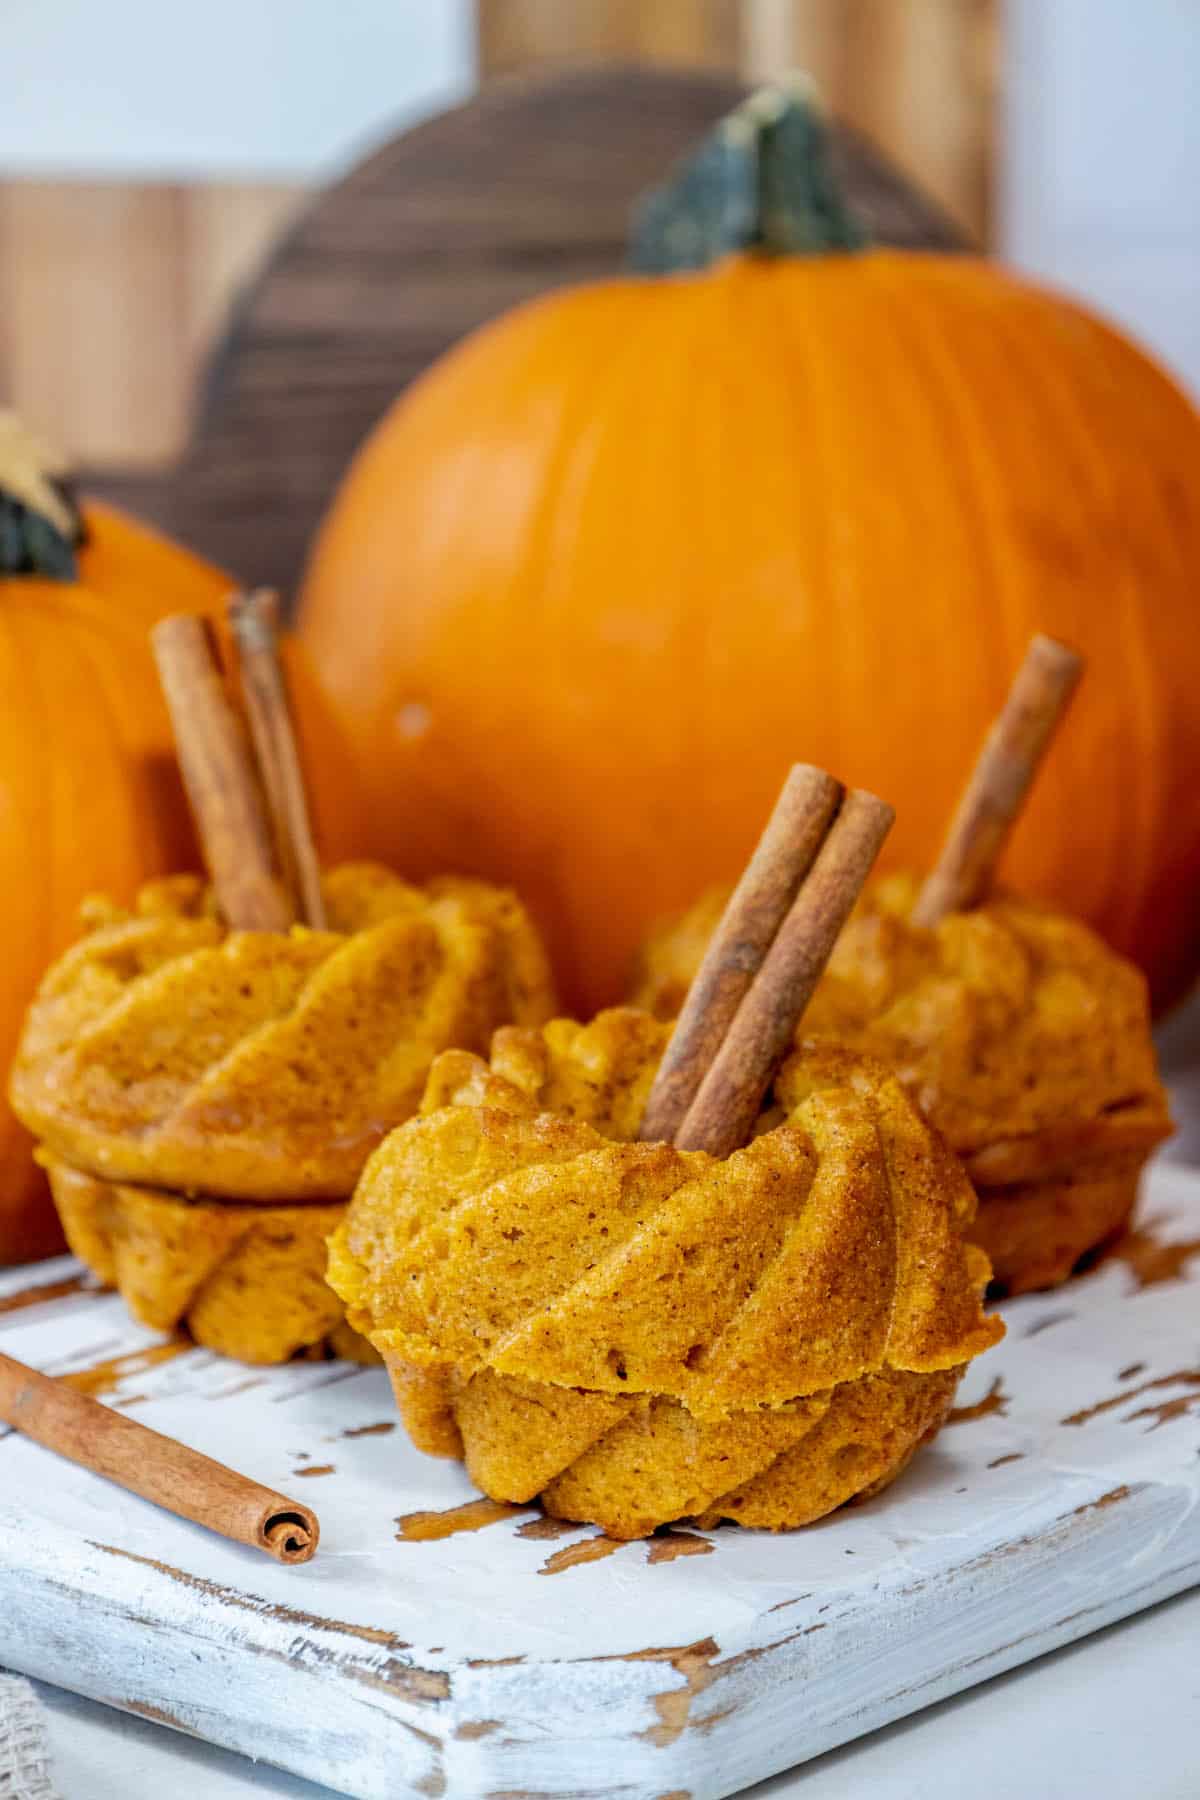 Pumpkin muffins with cinnamon sticks on a wooden cutting board, perfect for Halloween desserts.